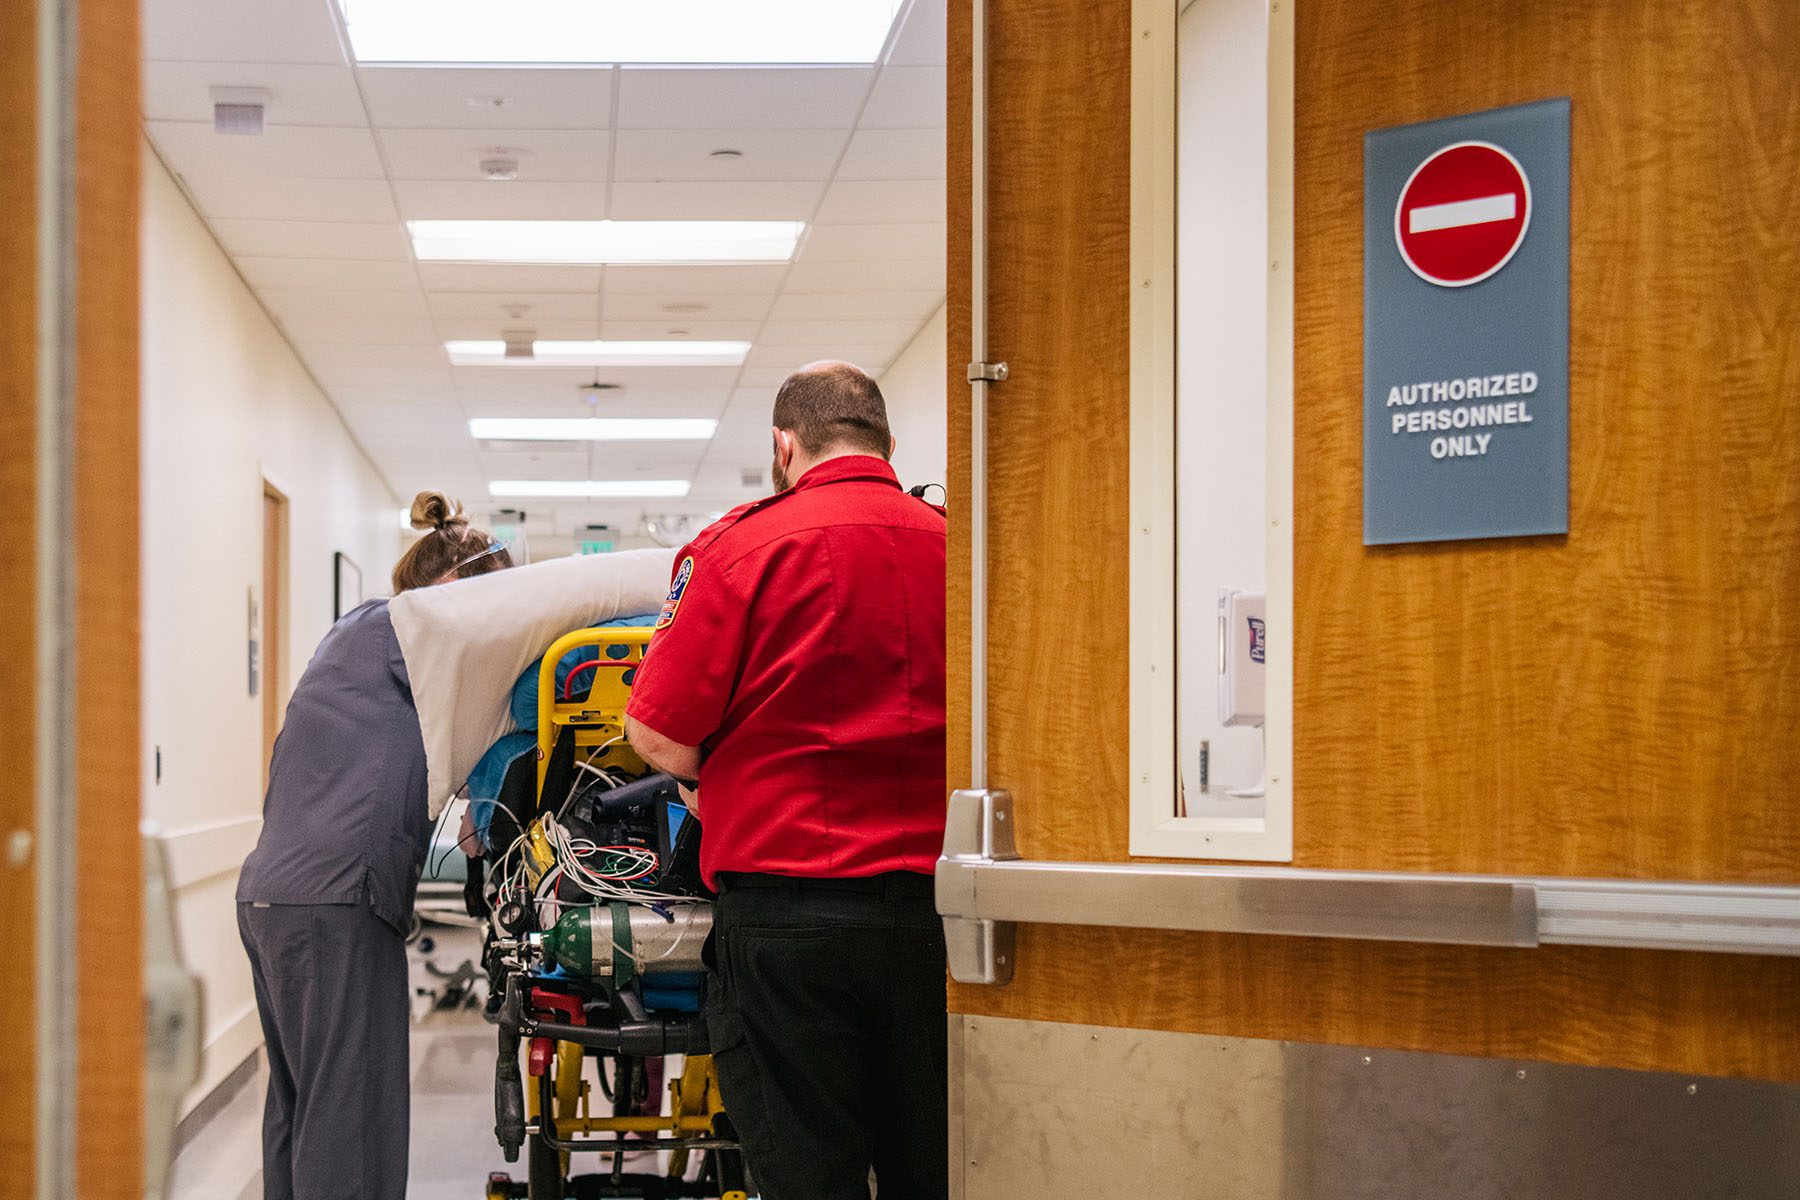 Emergency room nurses and EMTs tend to a patient in a hallway.